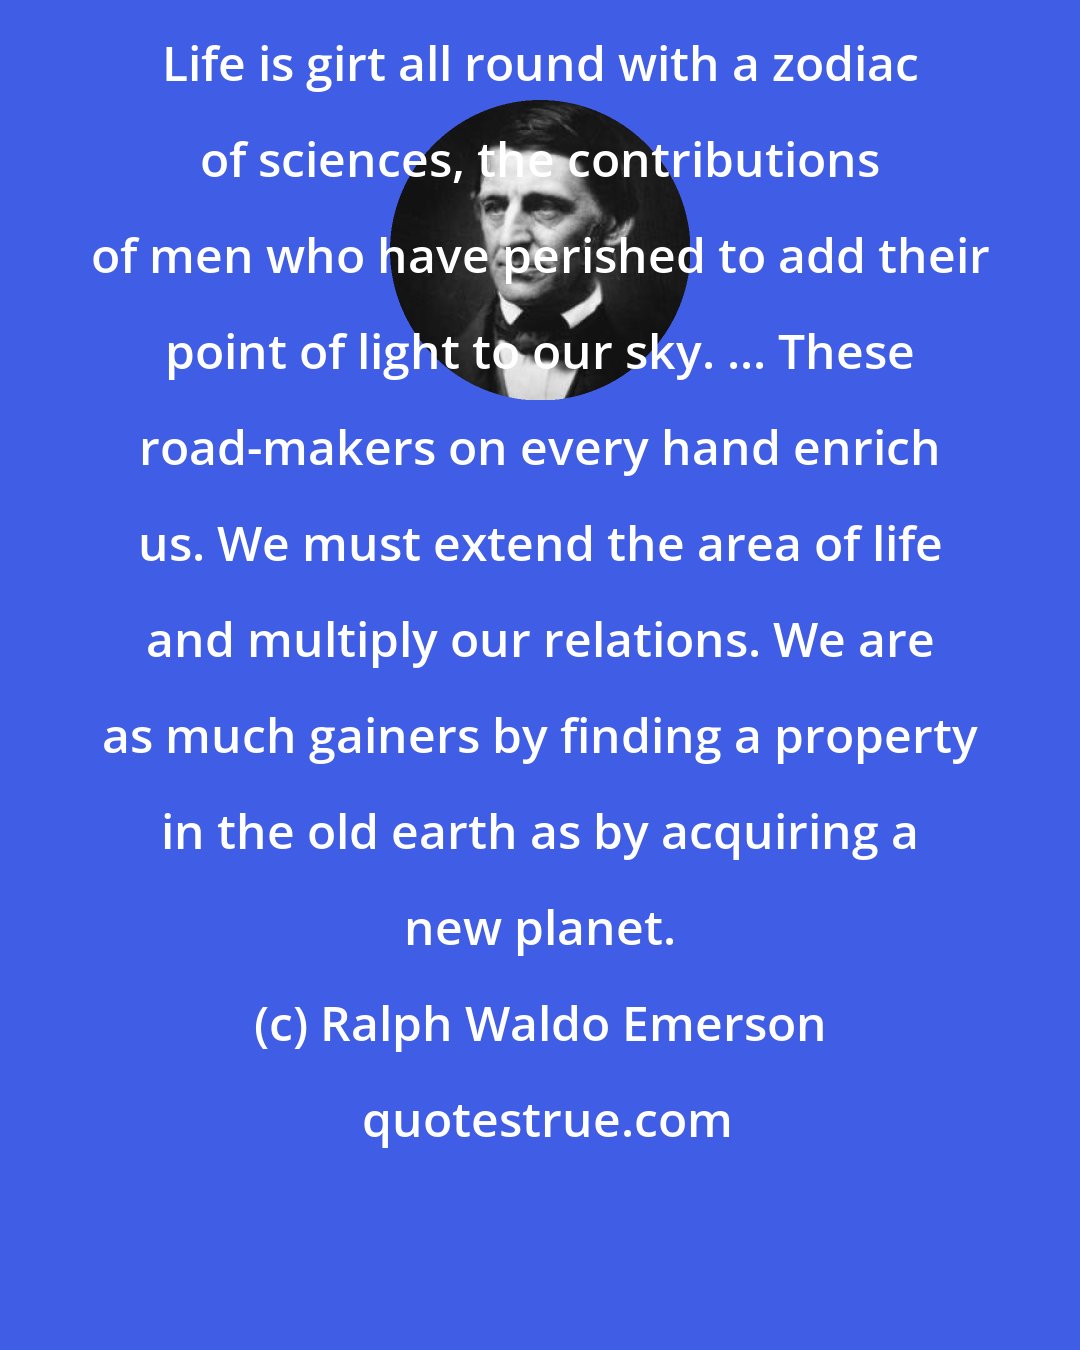 Ralph Waldo Emerson: Life is girt all round with a zodiac of sciences, the contributions of men who have perished to add their point of light to our sky. ... These road-makers on every hand enrich us. We must extend the area of life and multiply our relations. We are as much gainers by finding a property in the old earth as by acquiring a new planet.